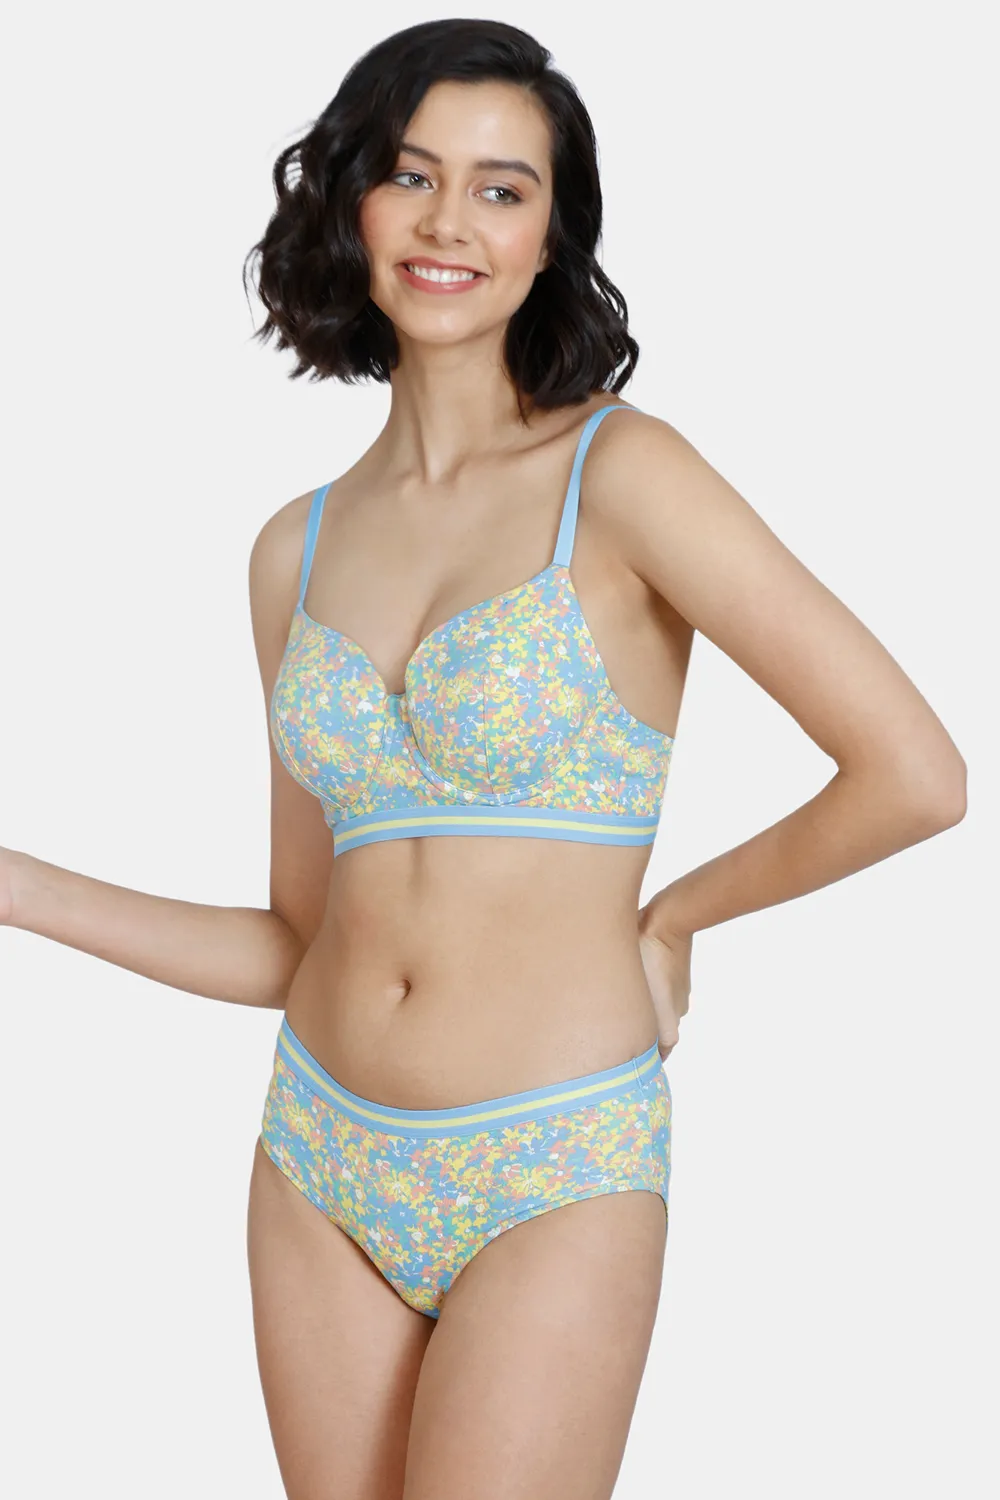 https://cdn.zivame.com/ik-seo/media/catalog/product/1/_/1_68_74/zivame-vivacious-padded-wired-3-4th-coverage-t-shirt-bra-with-hipster-panty-blue-print.jpg